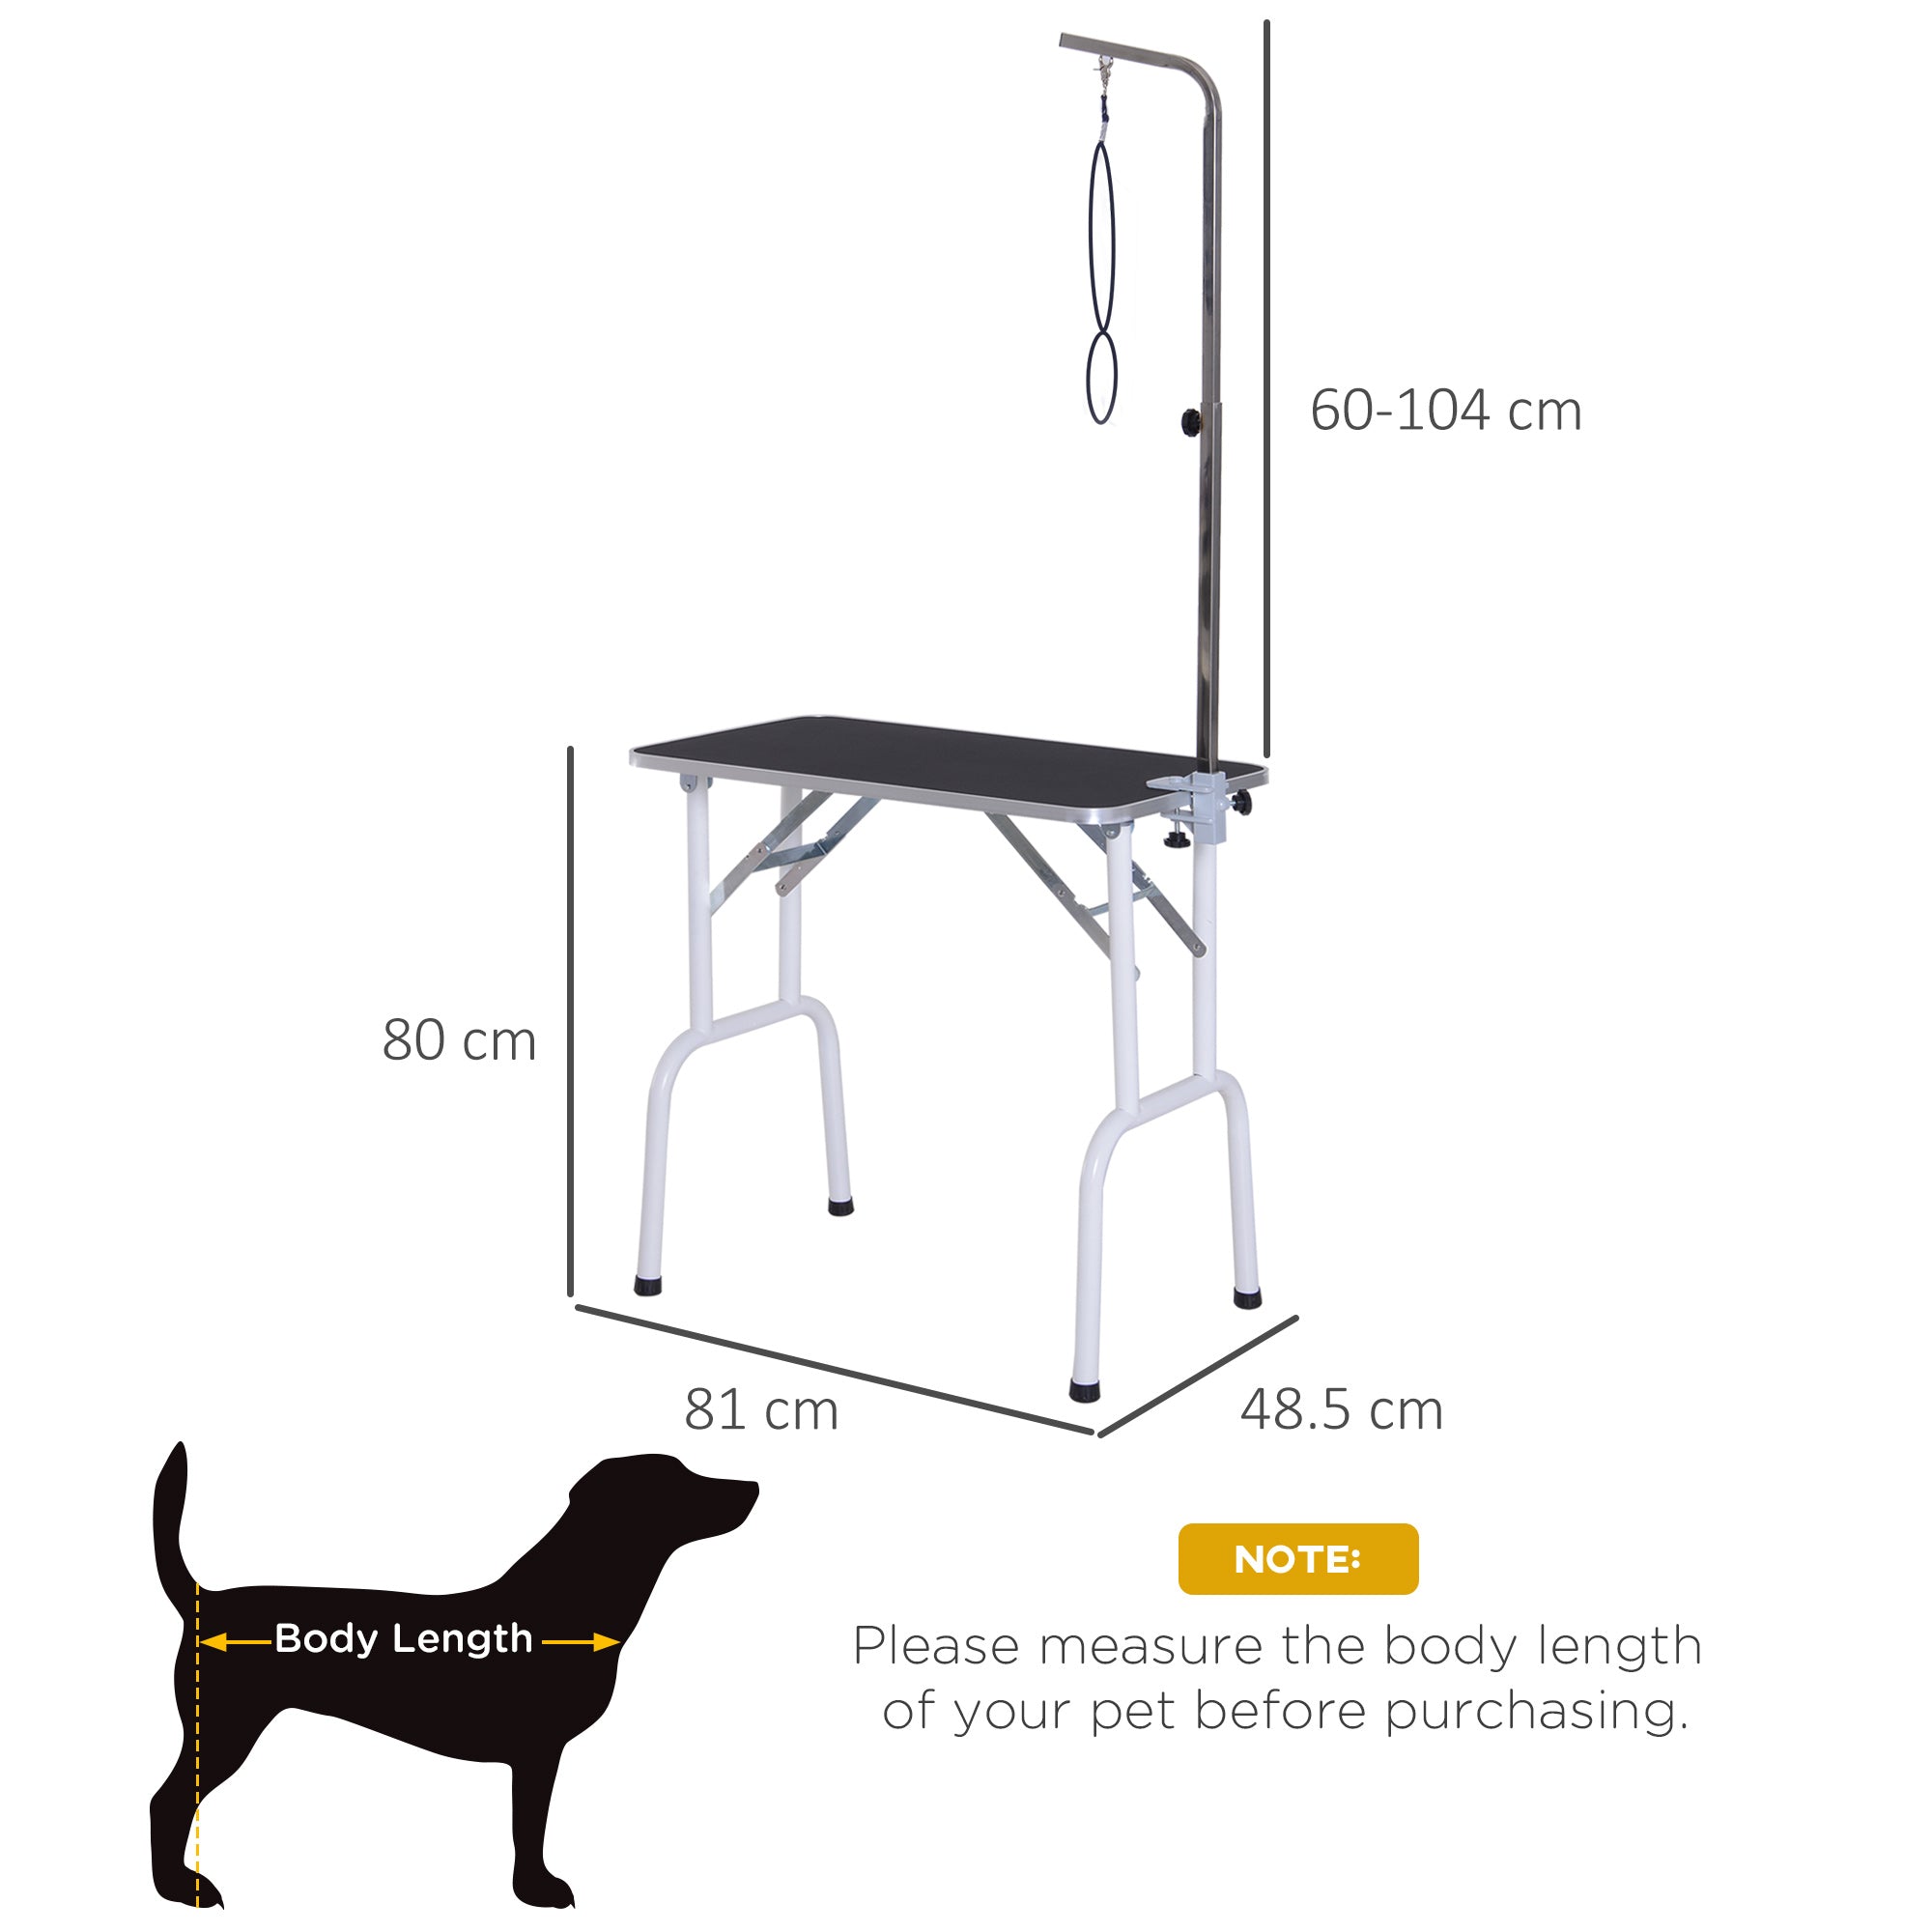 Folding Pet Grooming Table for Small Dogs with Adjustable Grooming Arm Max Load 30 KG, 81x48.5x80 cm-2